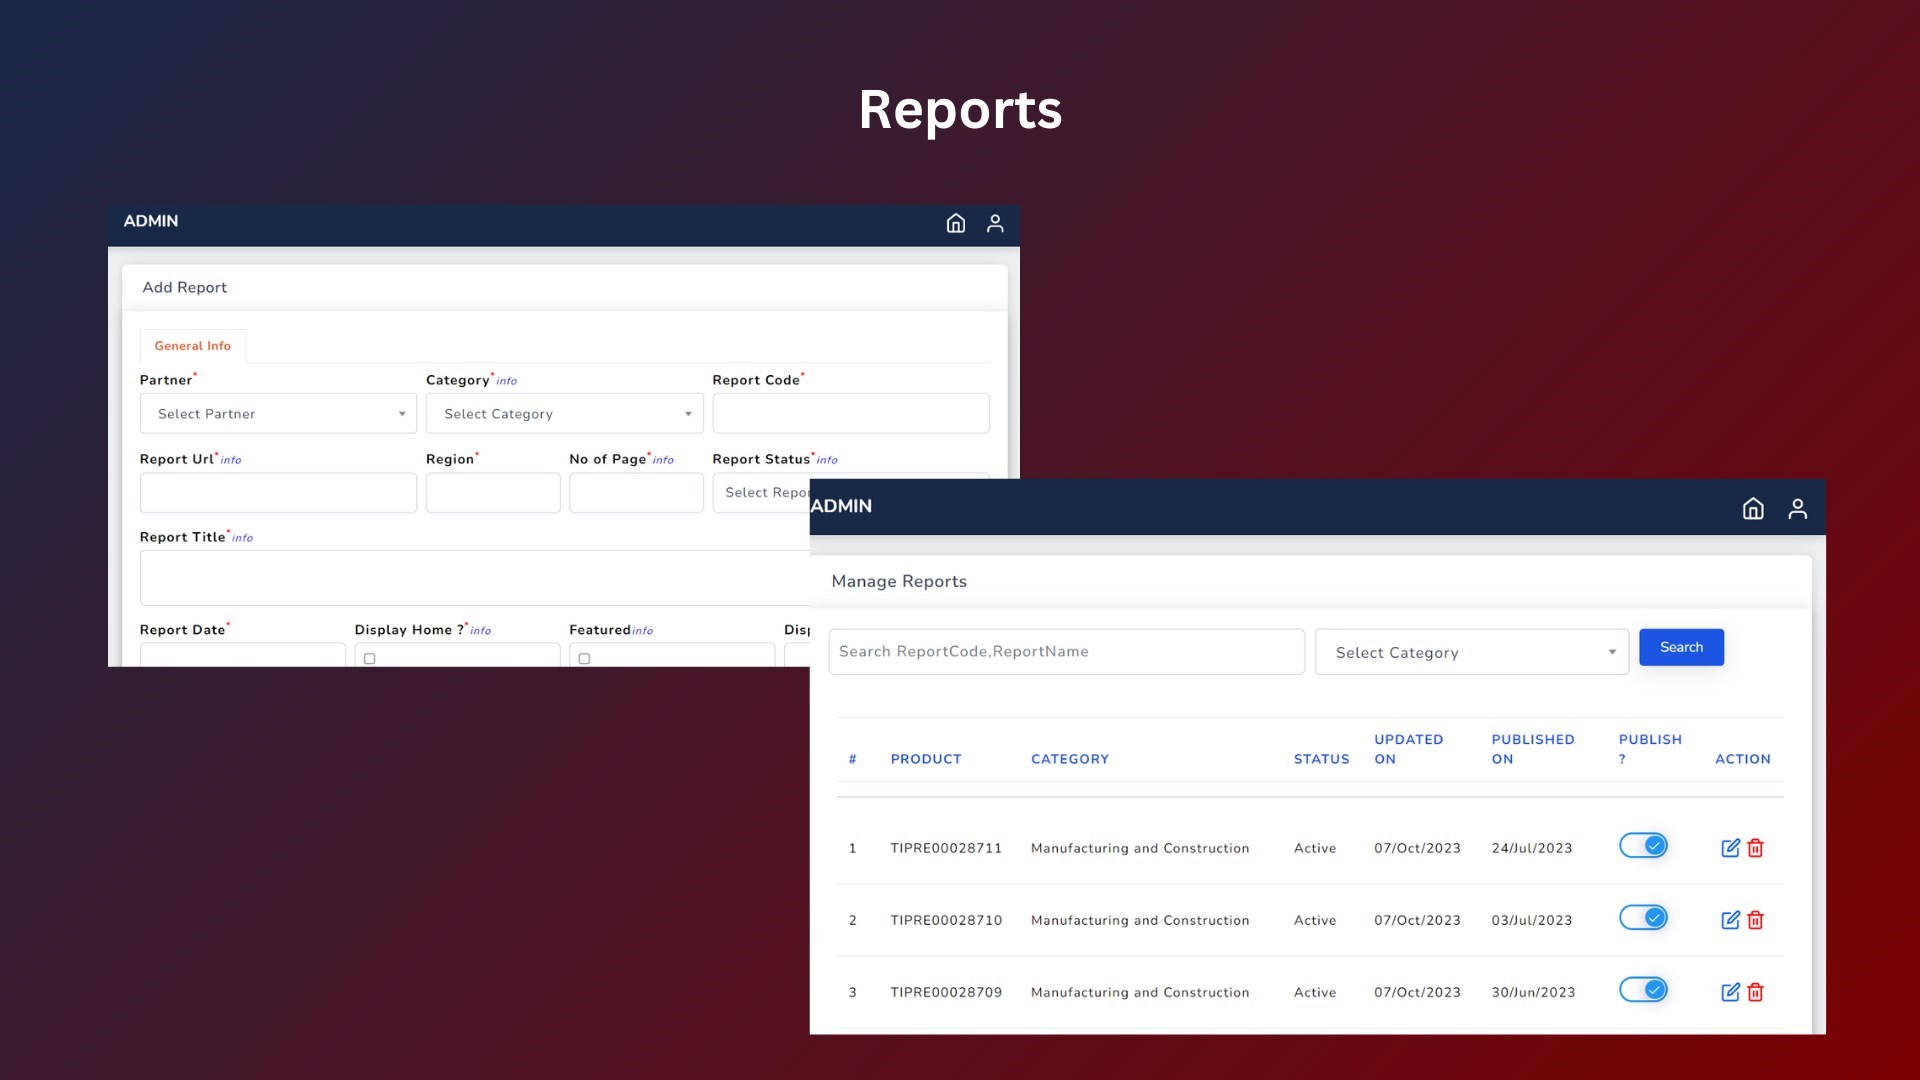 Feature to manage market reports with a table of contents, full descriptions, company listings, reasons to buy, and a list of tables, all accompanied by an SEO enhancement option for updating page titles, meta descriptions, and meta titles.